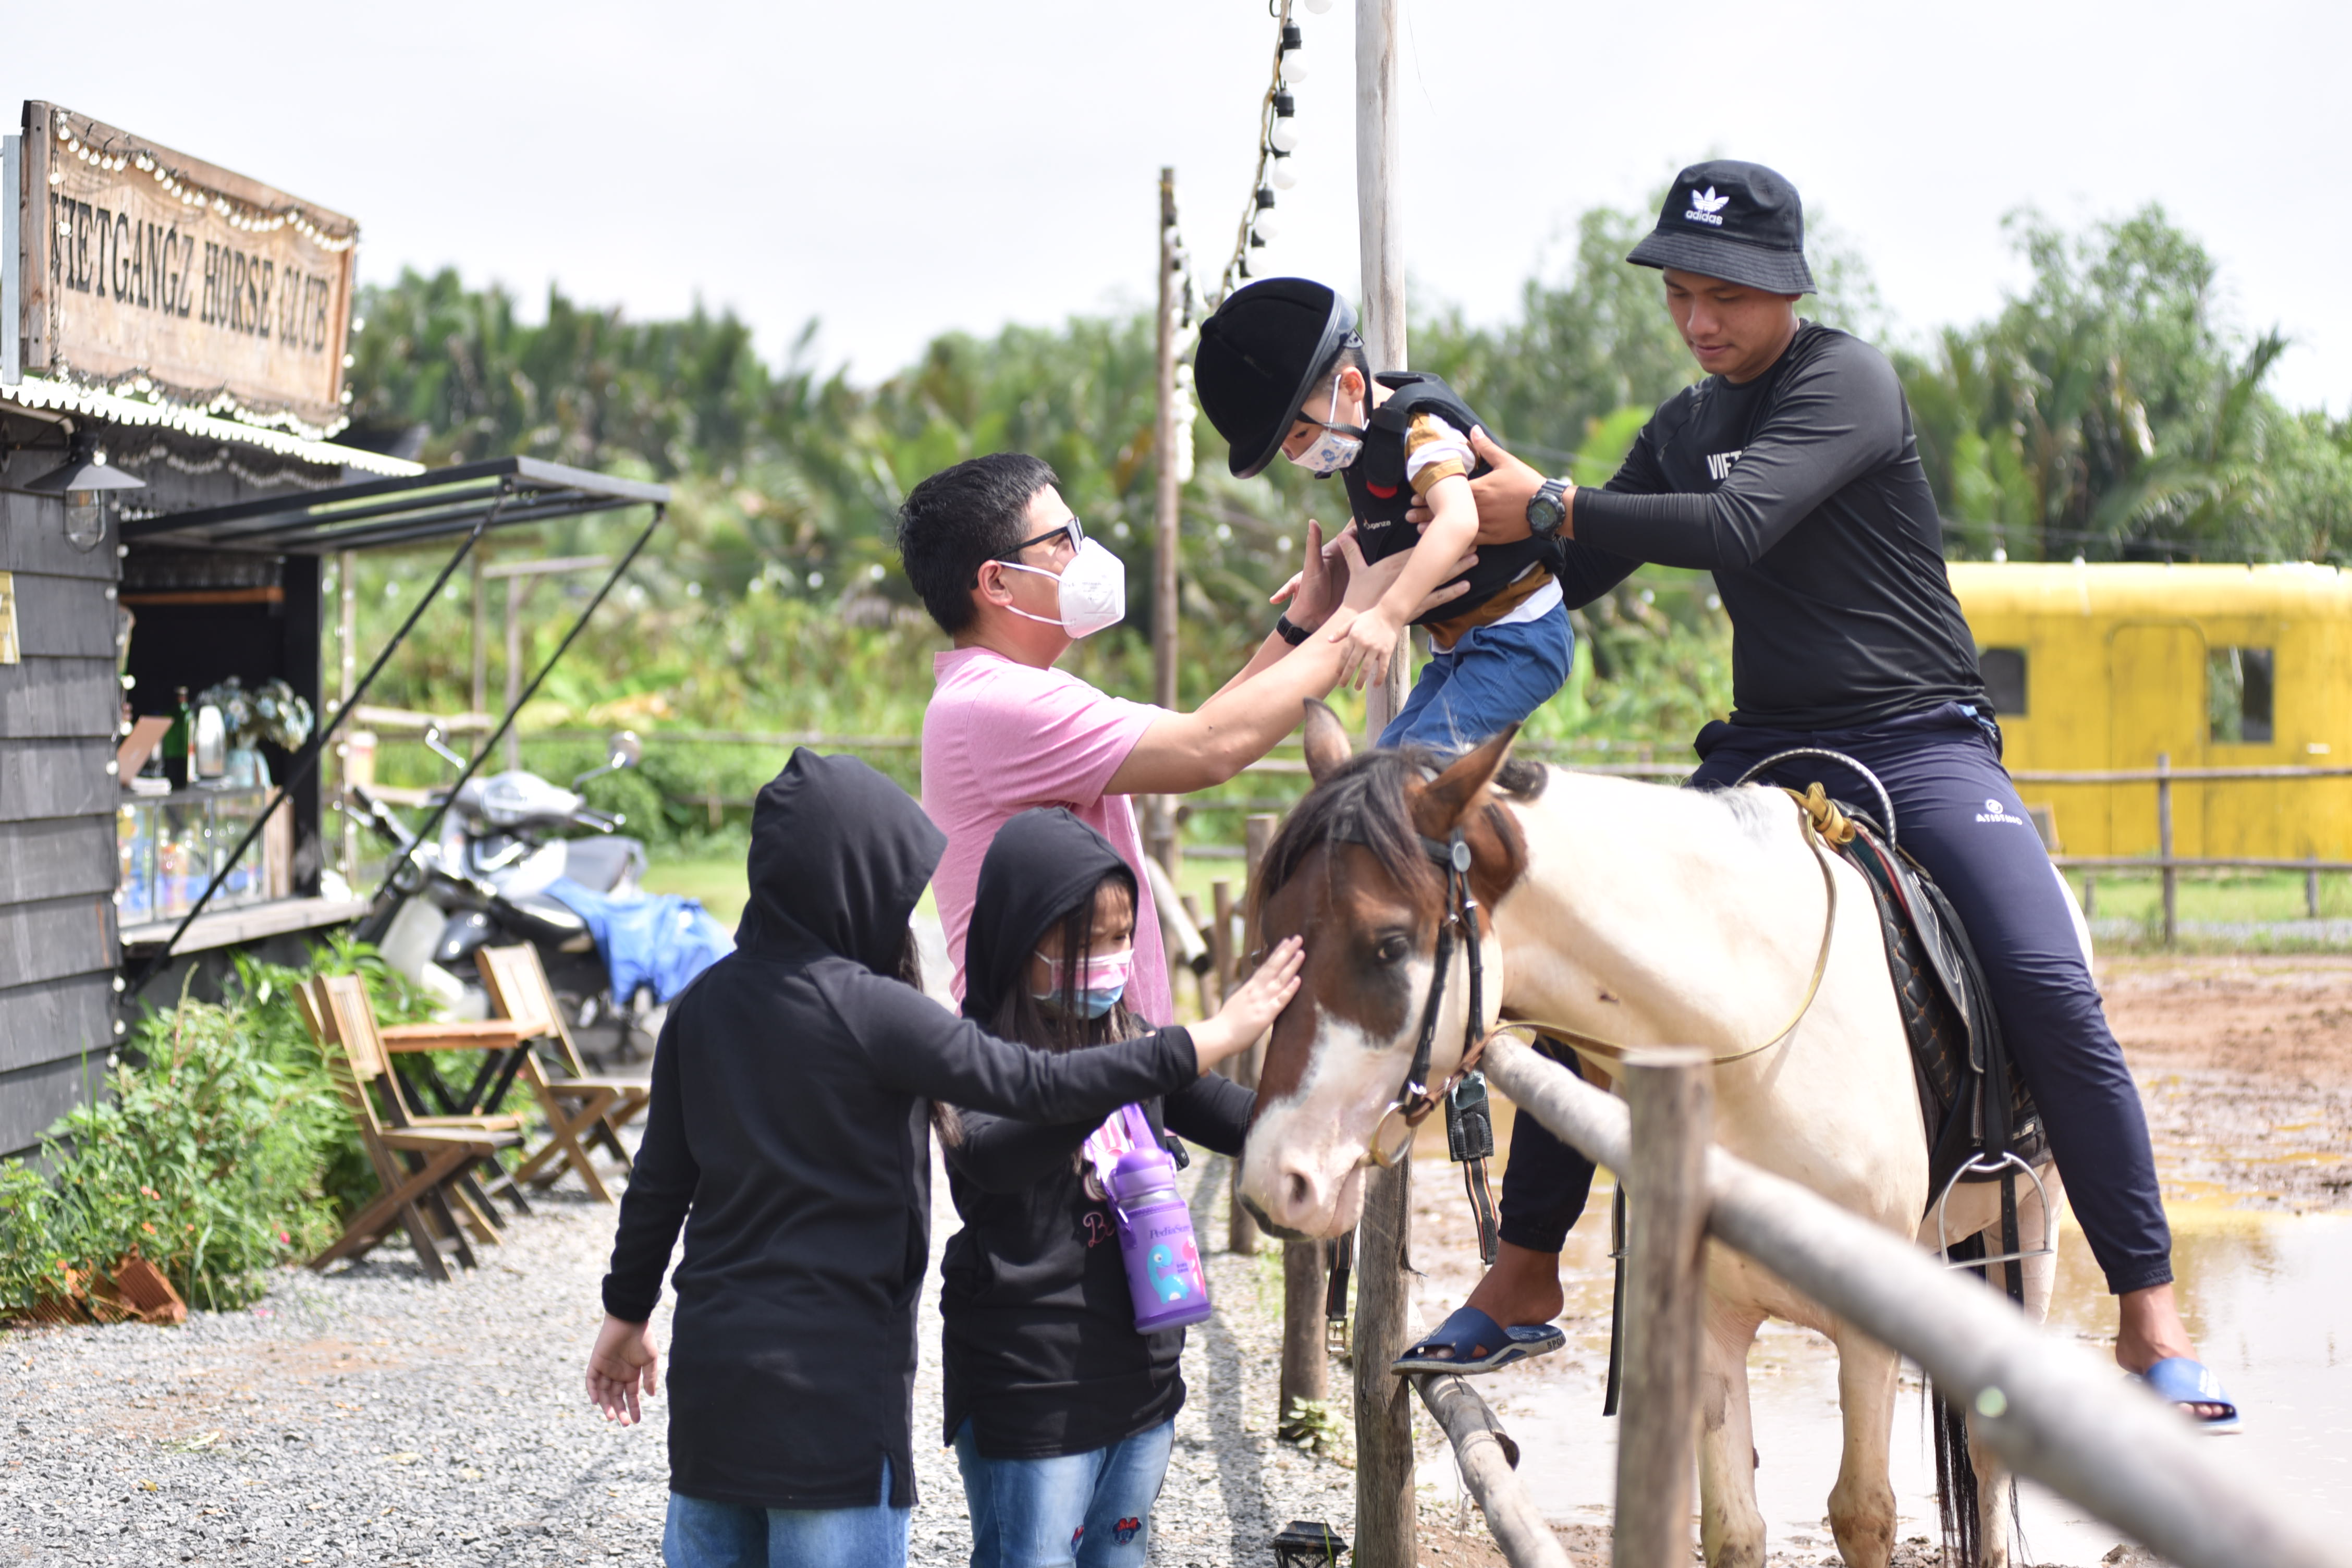 Children play with a horse at Vietgangz Horse Club, Thu Duc City, Ho Chi Minh City. Photo: Ngoc Phuong / Tuoi Tre News